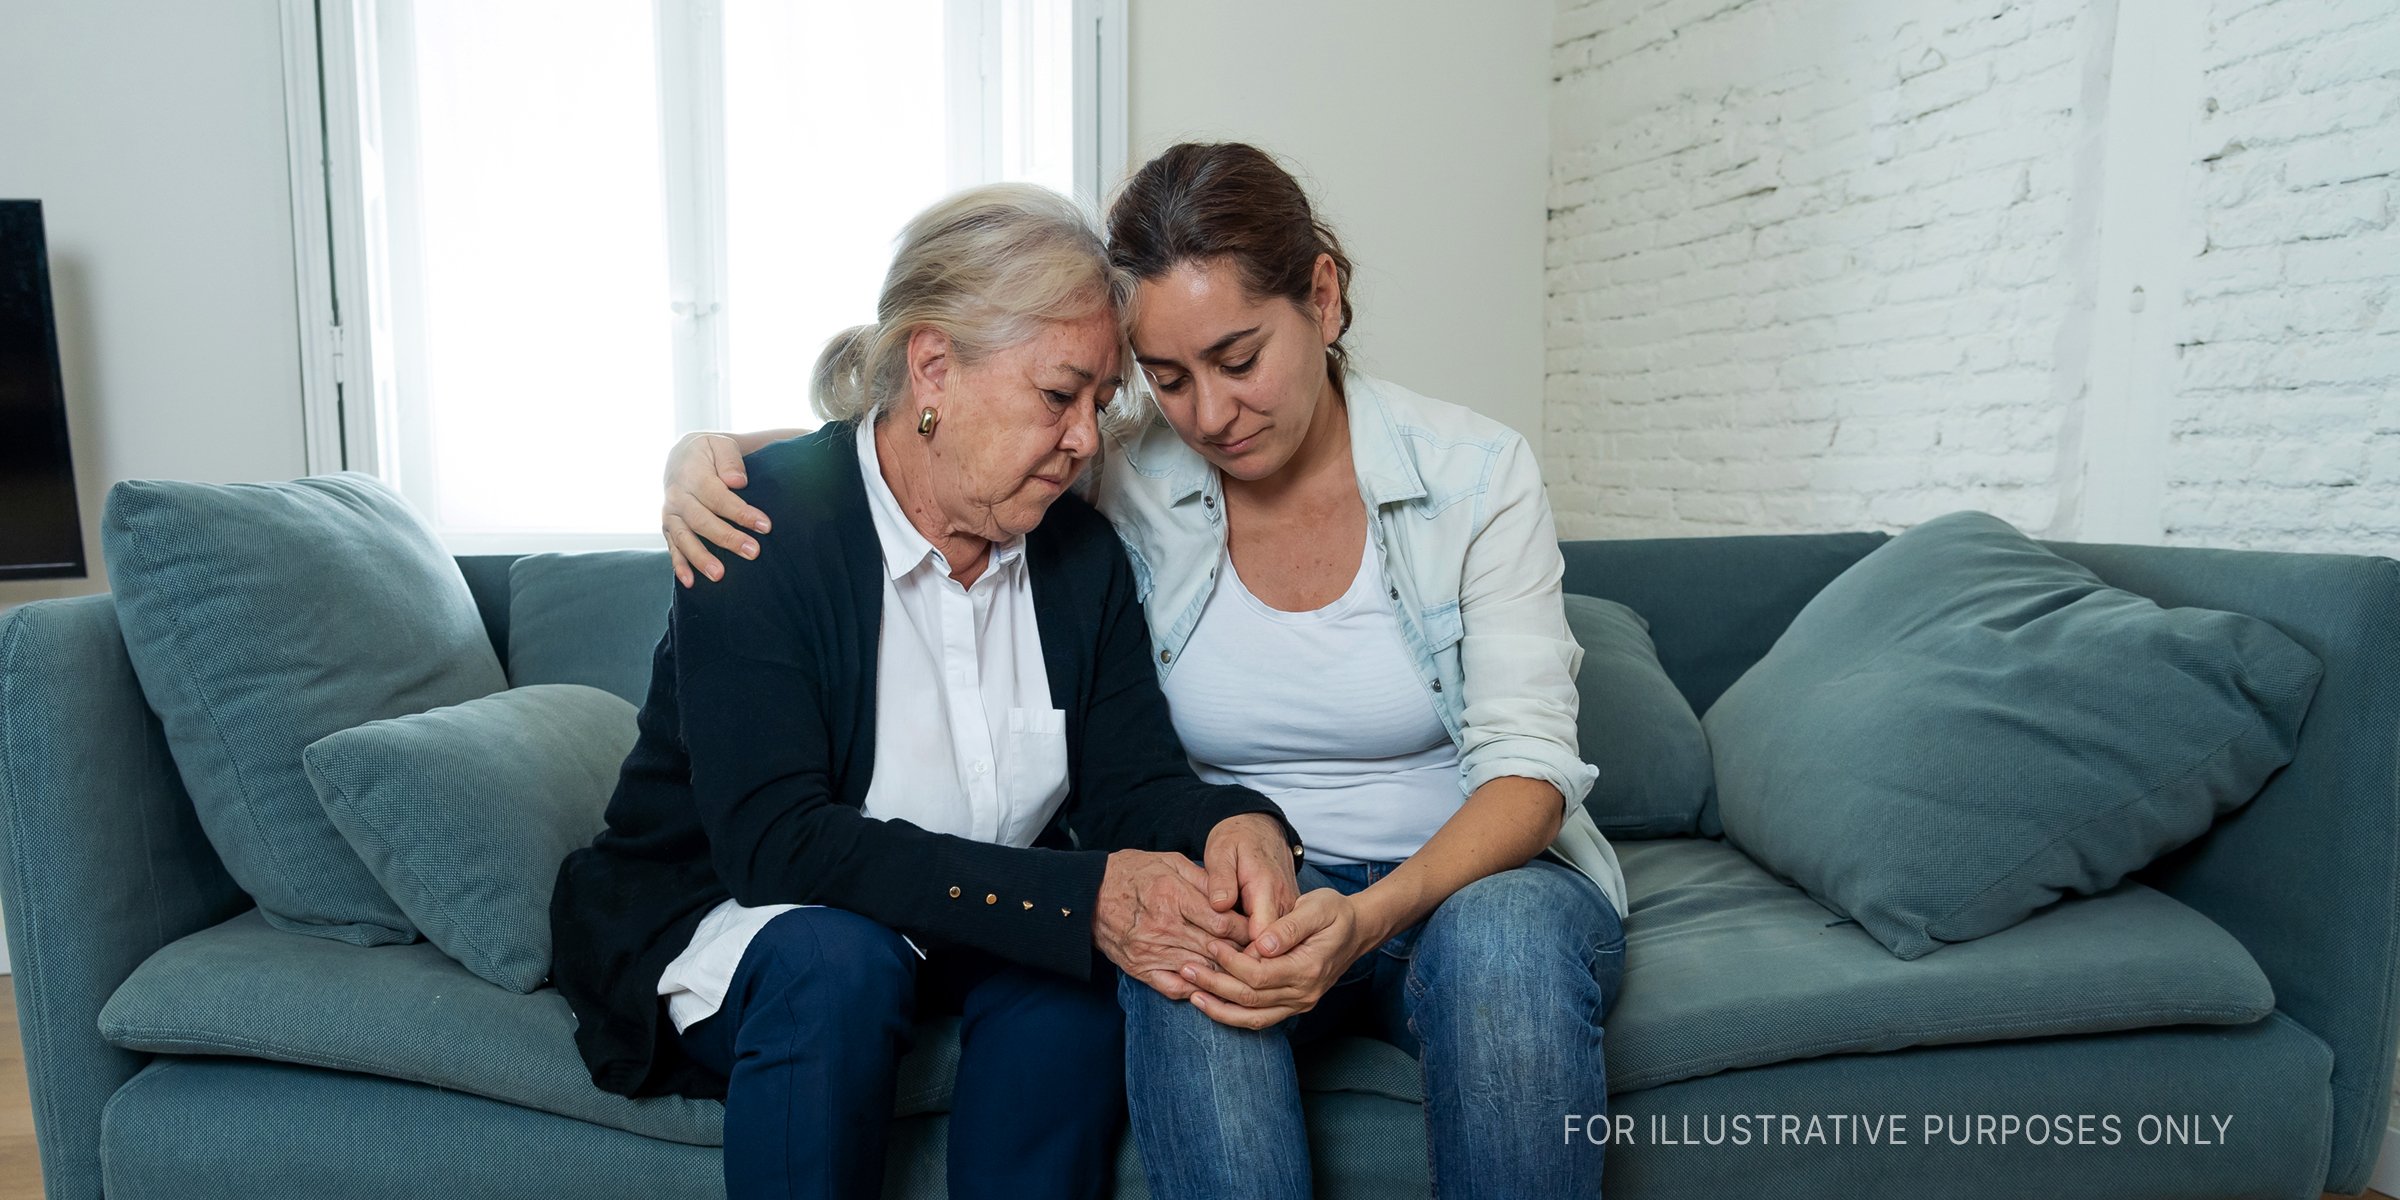 Old woman and younger woman holding each other on a sofa. | Source: Shutterstock